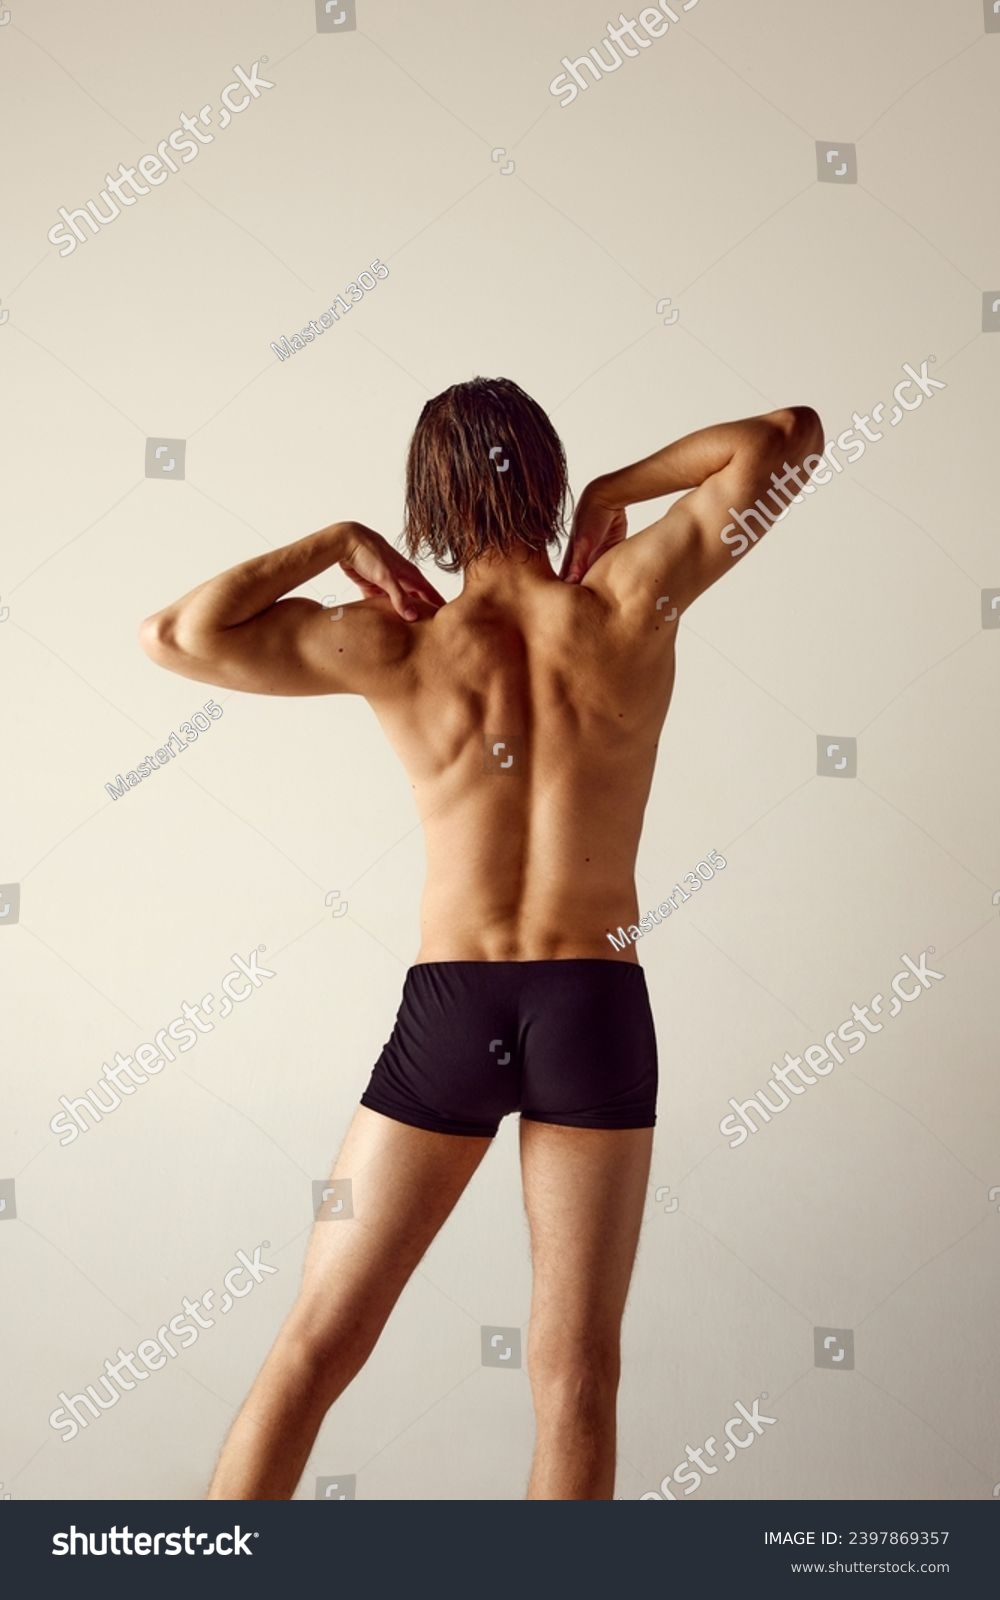 Shirtless young man with fit body standing in underwear against grey studio background. Relief strong healthy back, spine. Concept of men's beauty, health, body care, sportive lifestyle #2397869357